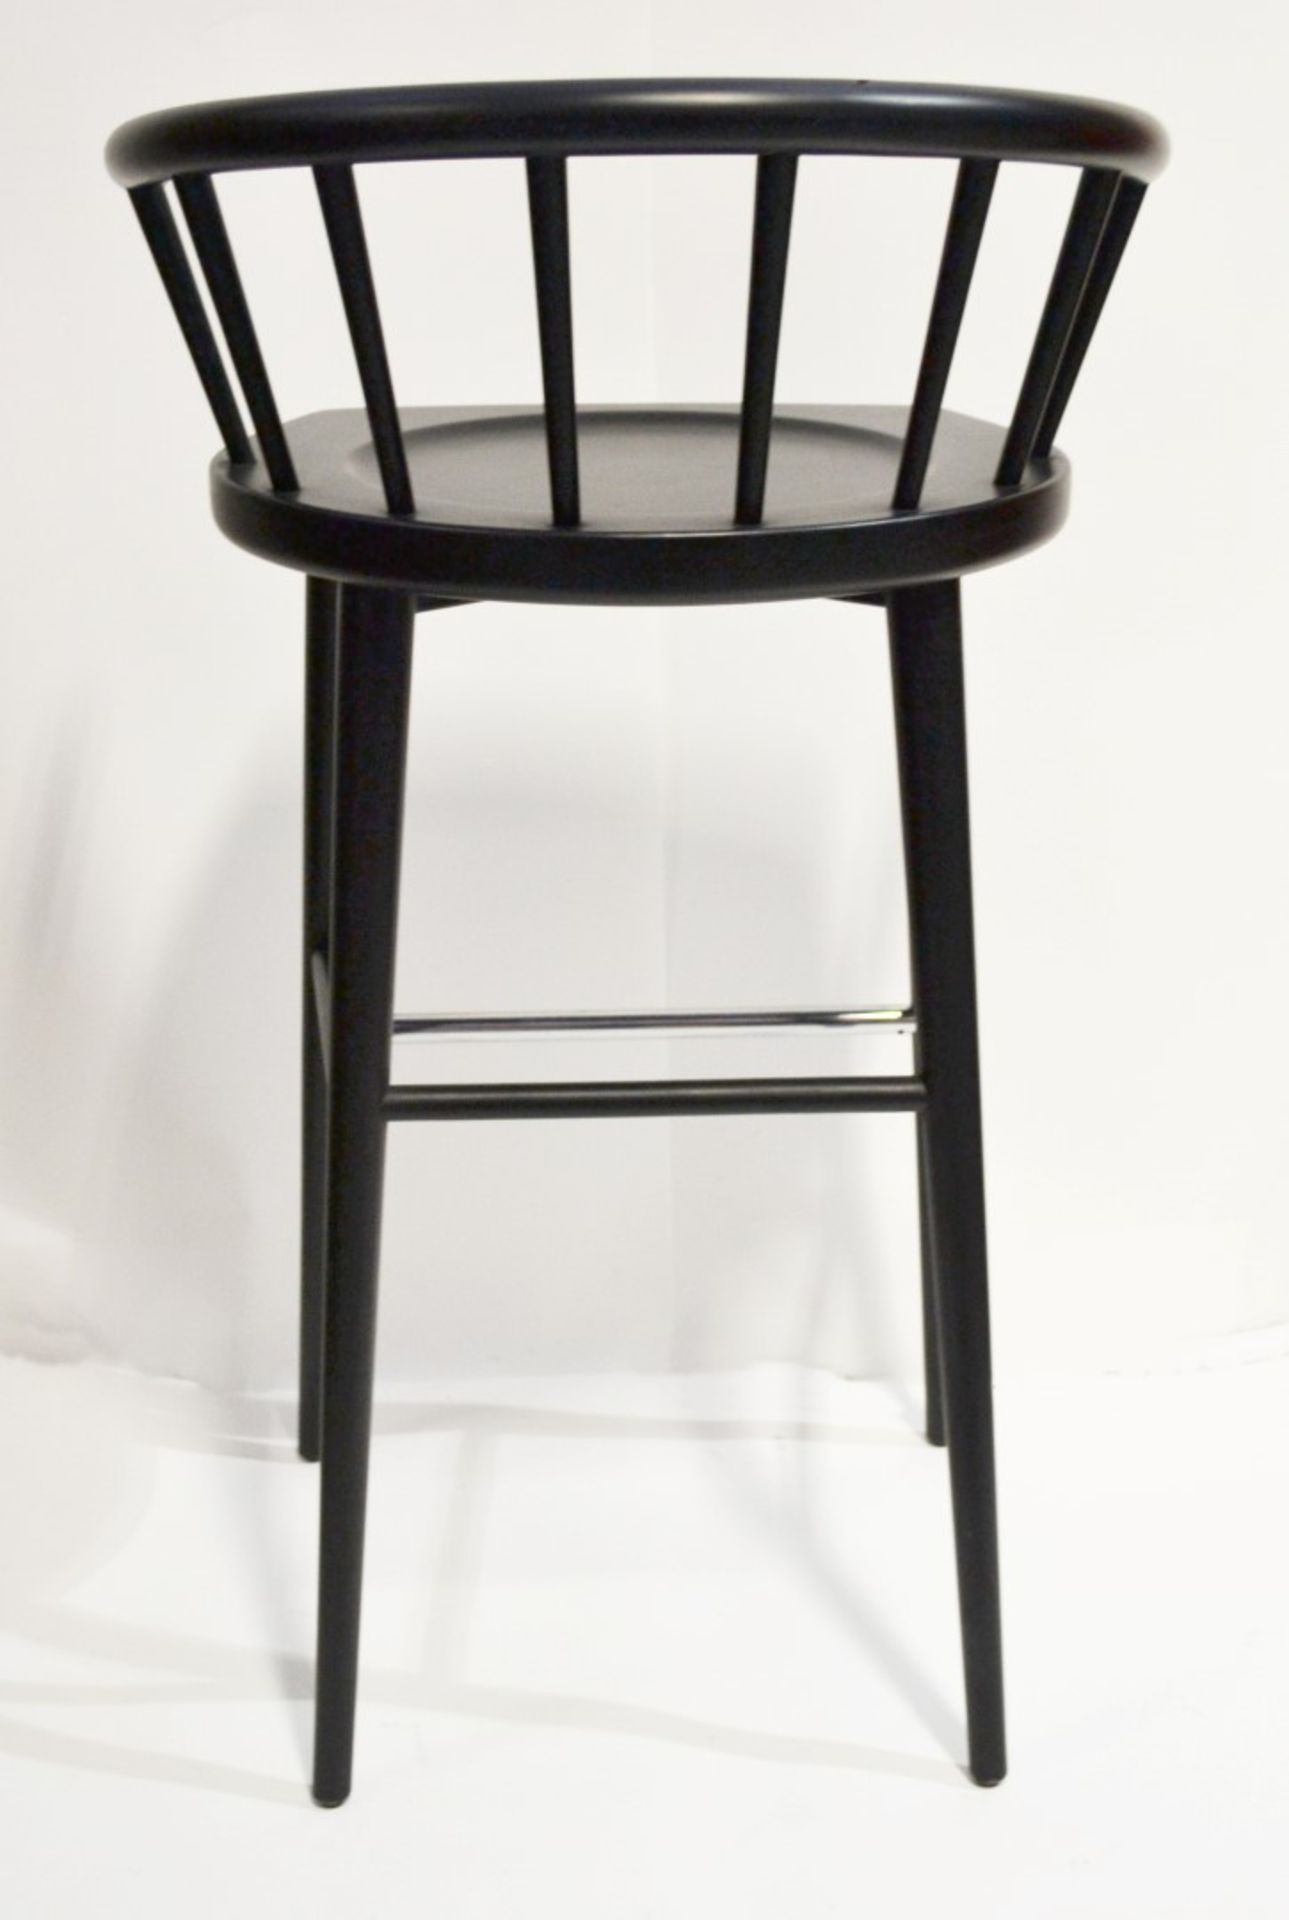 4 x Curved Spindleback Wooden Bar Stools With Shaped Seats, Chrome Footrests and Dark Finish - - Image 5 of 6